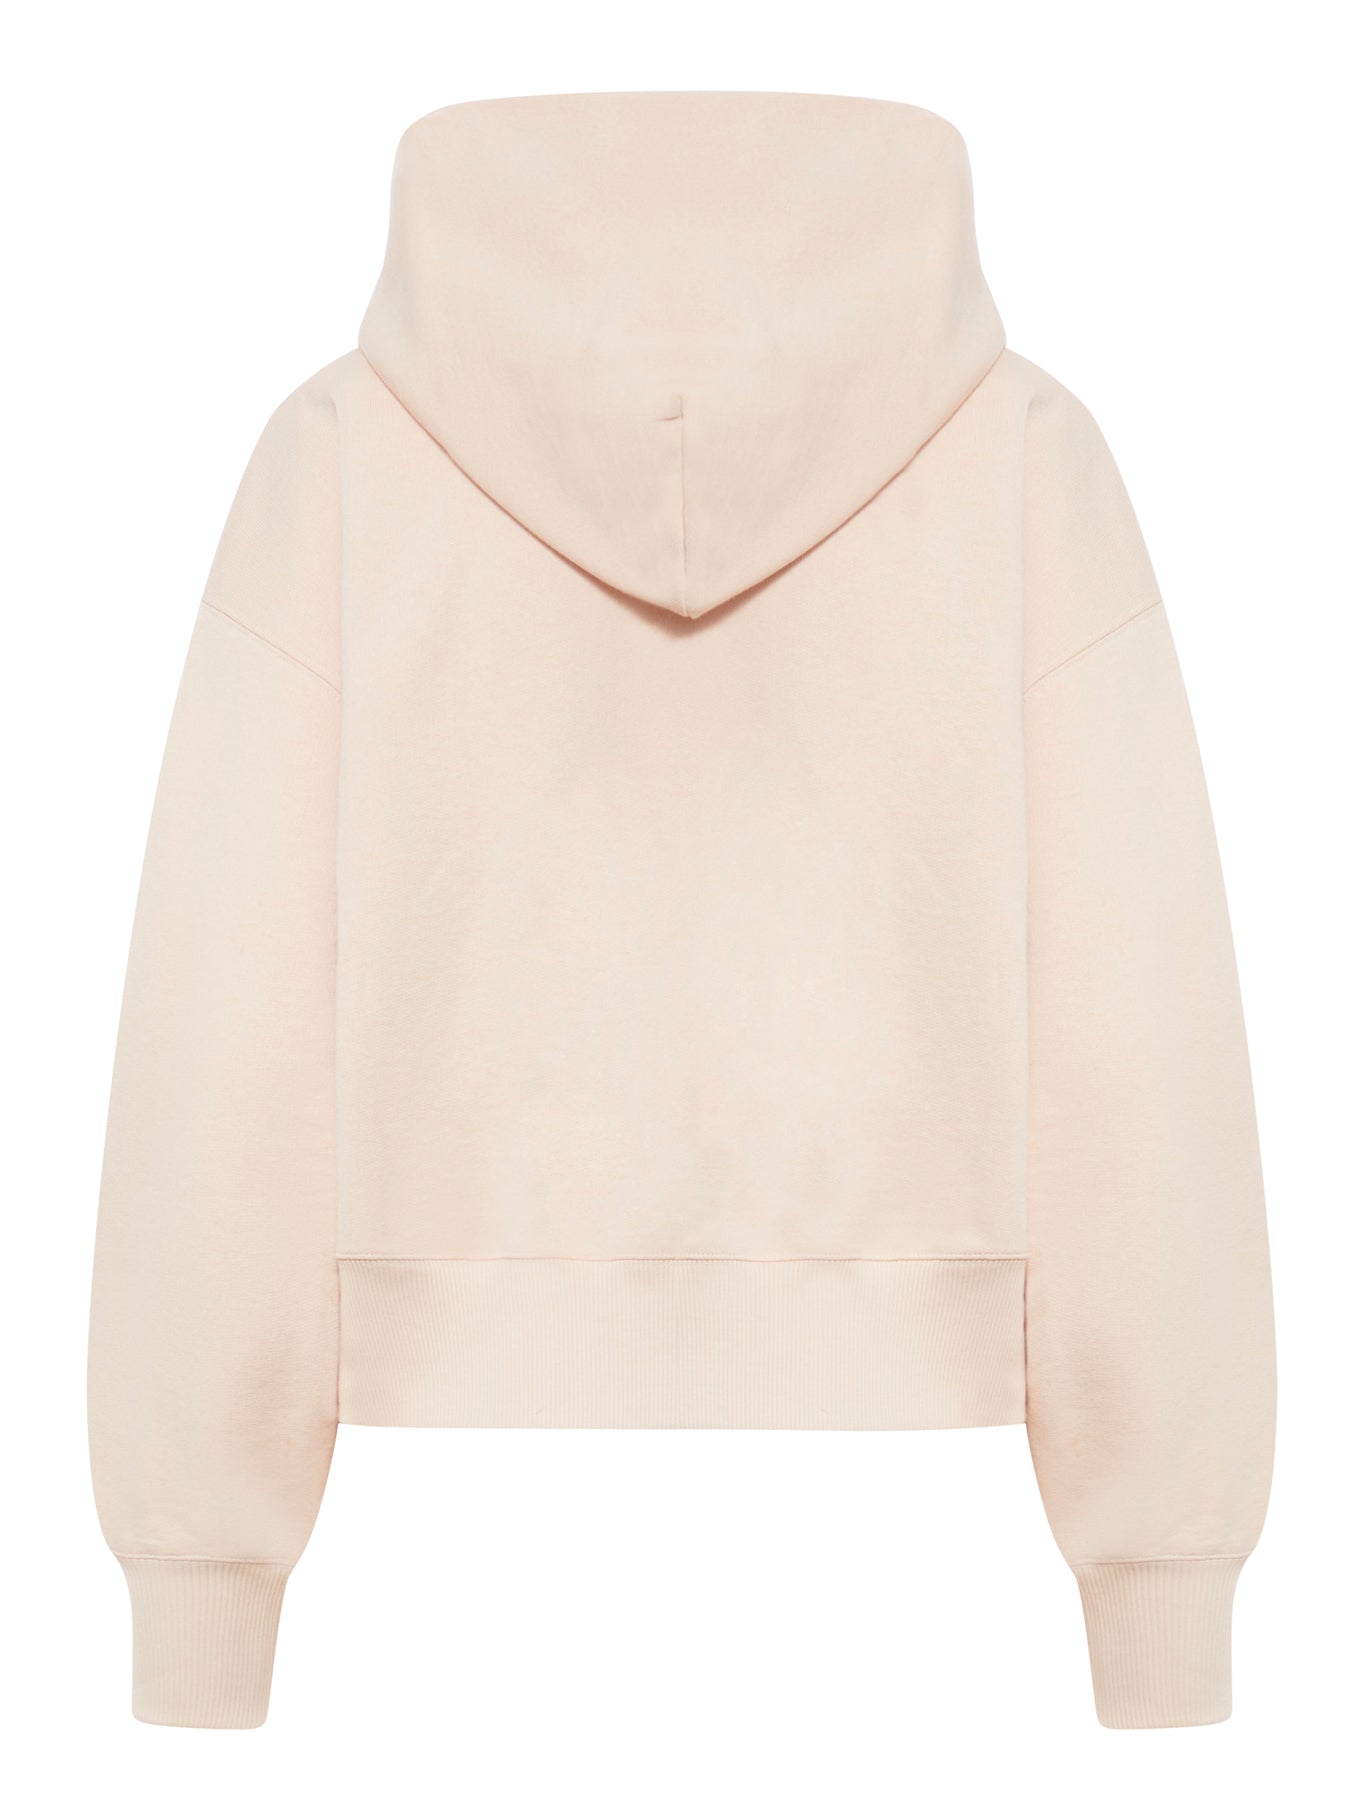 COTTON JERSEY SWEATSHIRT WITH EMBROIDERY